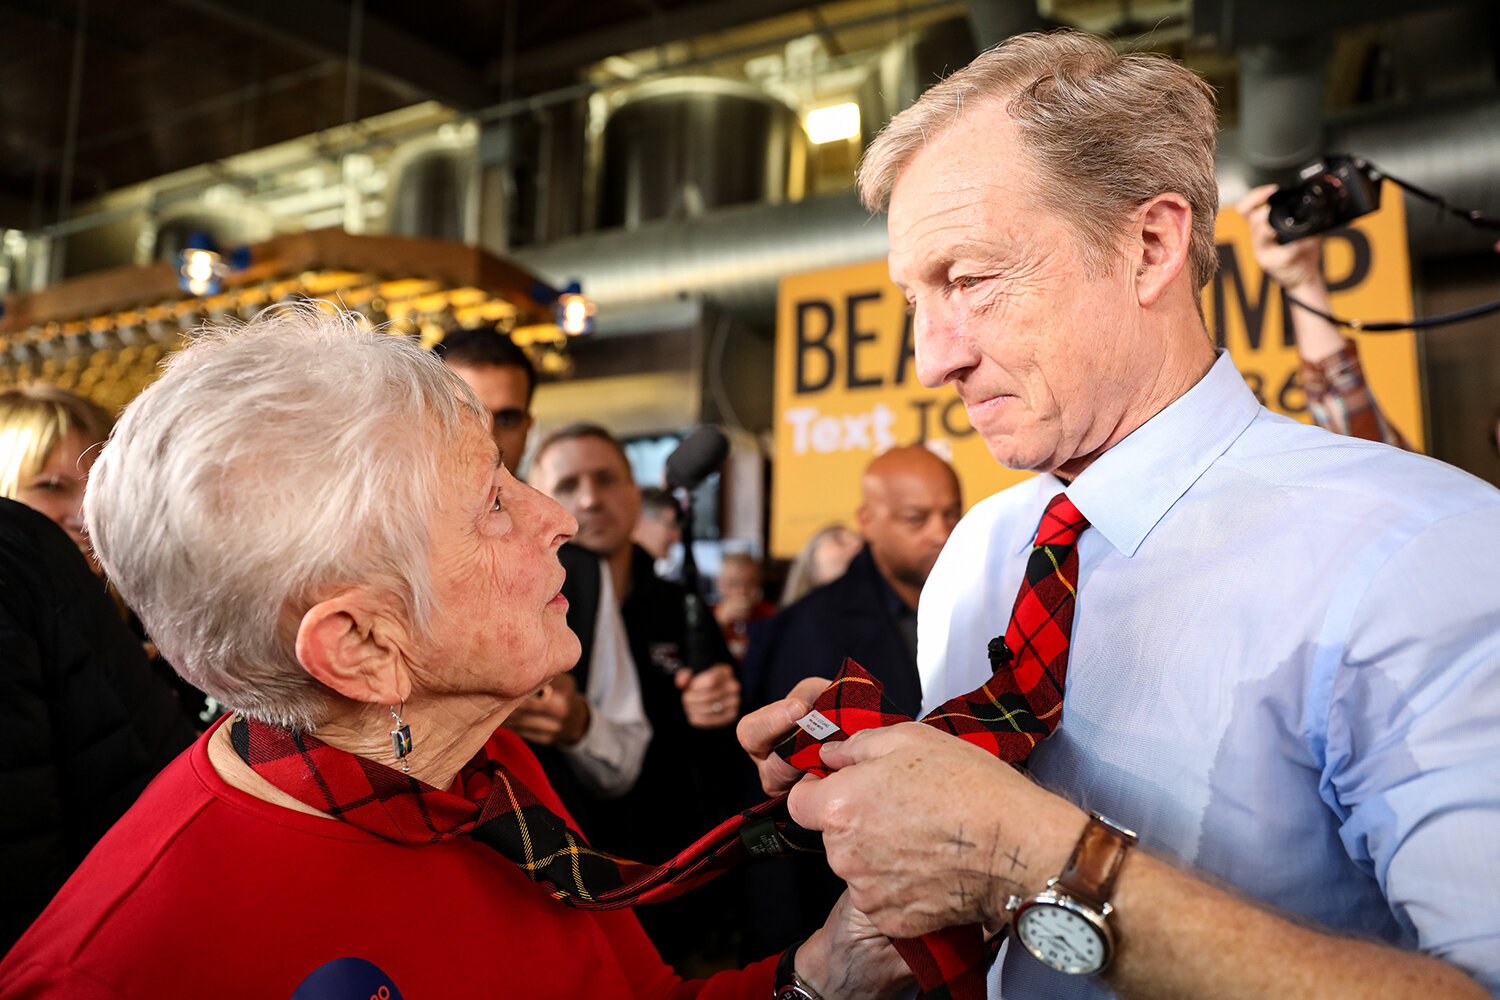  Mary Kathryn Wallace of Iowa City compares neckties with Democratic Presidential hopeful Tom Steyer after a Town Hall Meeting at Backpocket Brewing in Coralville, IA on Sunday, Feb. 2, 2020. Wallace is a caucus captain for Steyer and said that the p